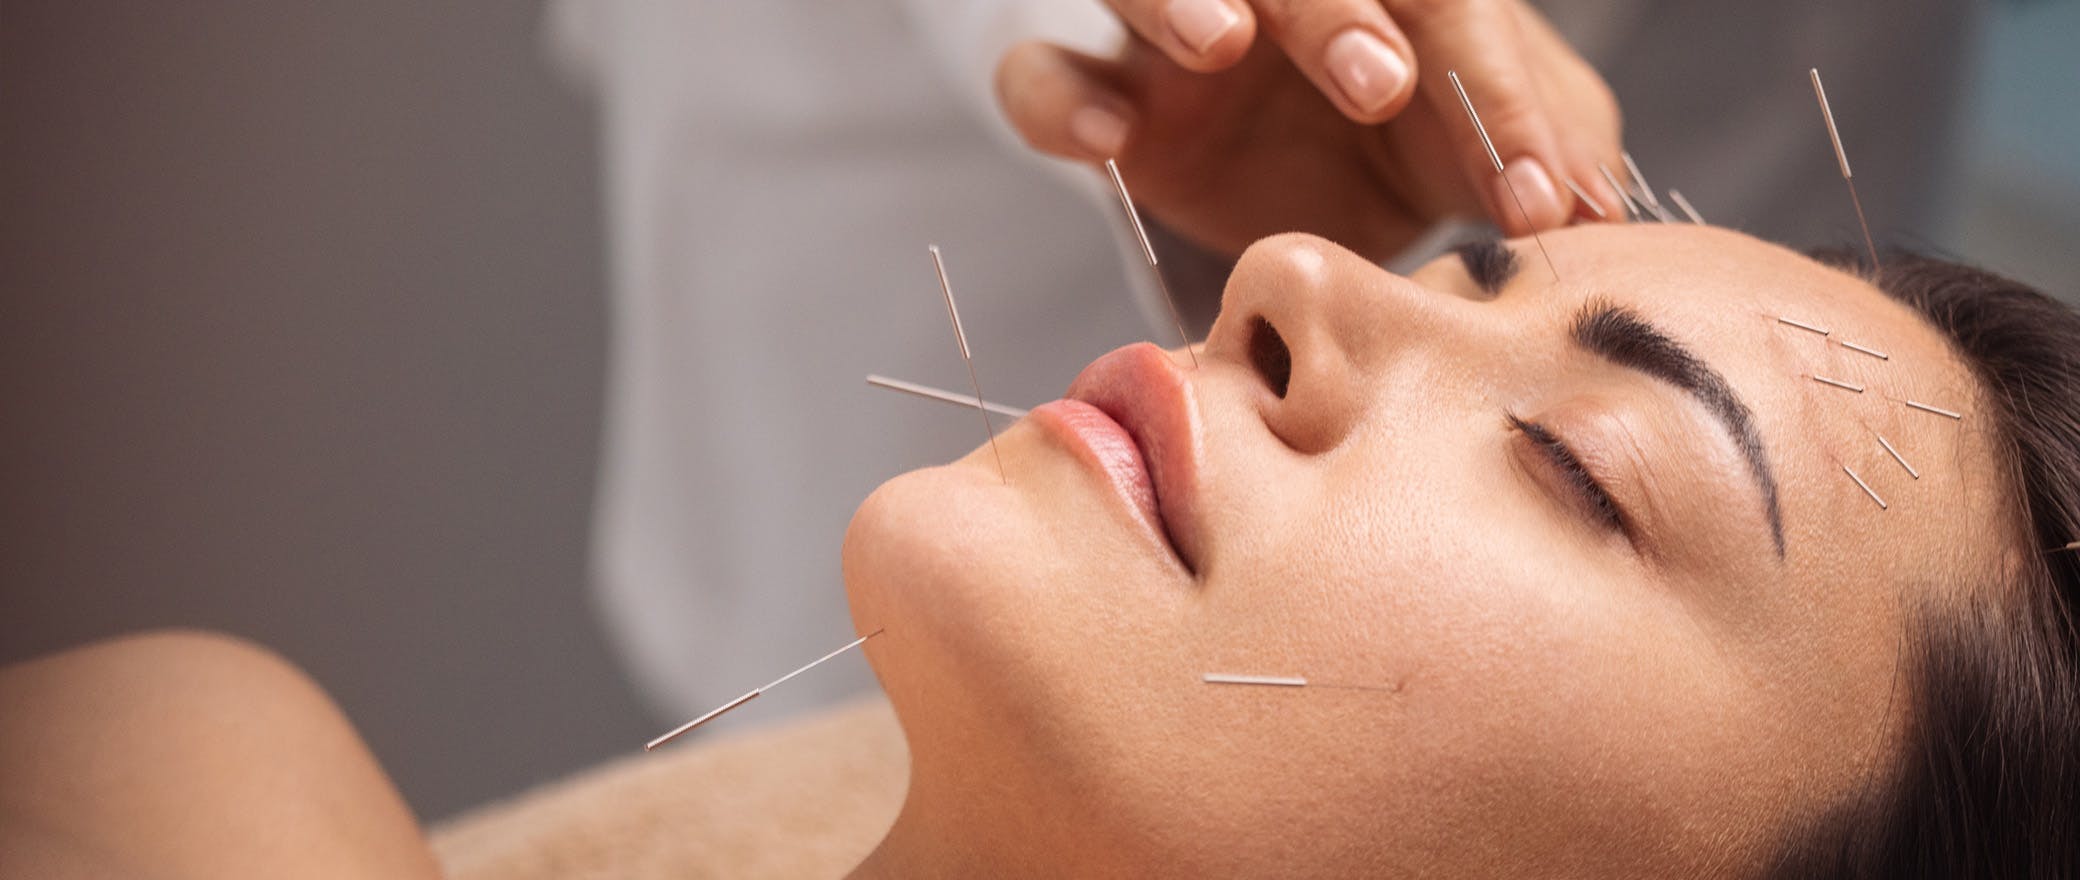 A close-up shot of an acupuncture specialist inserting needles into a female patient's face.